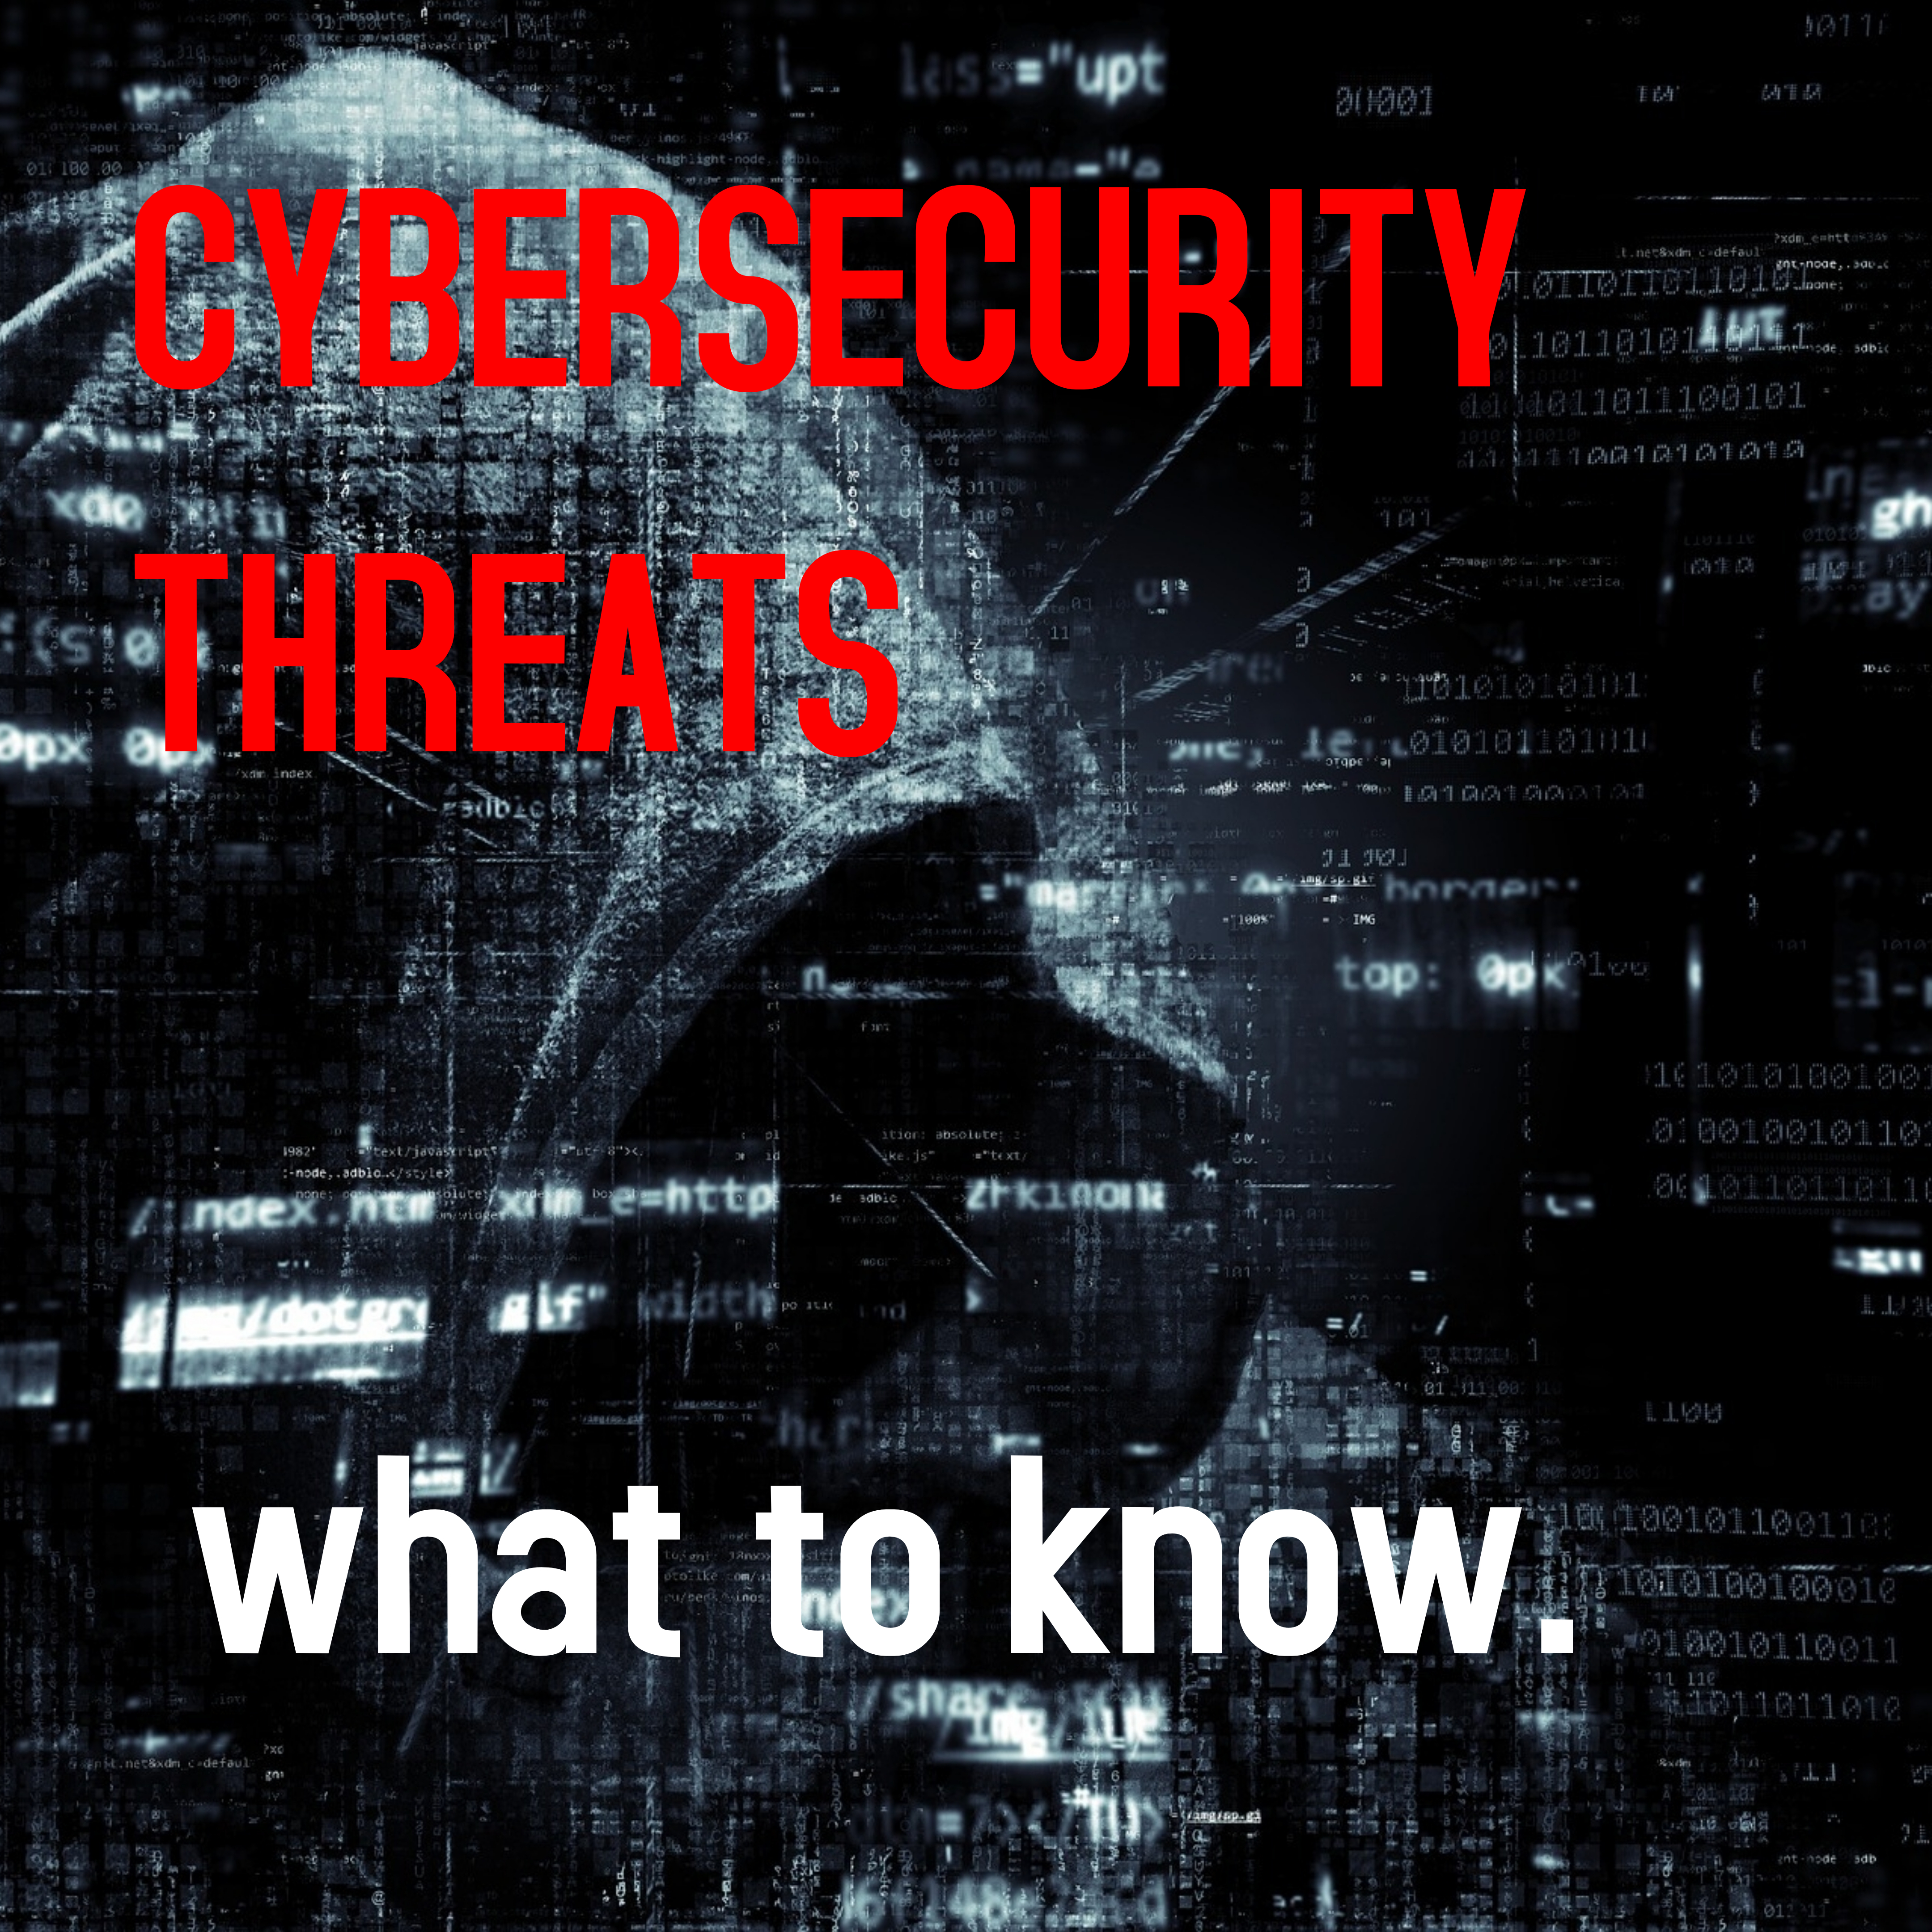 IT Expert, Philip Funks, Gives a detailed analysis and explanation on Cybersecurity threats